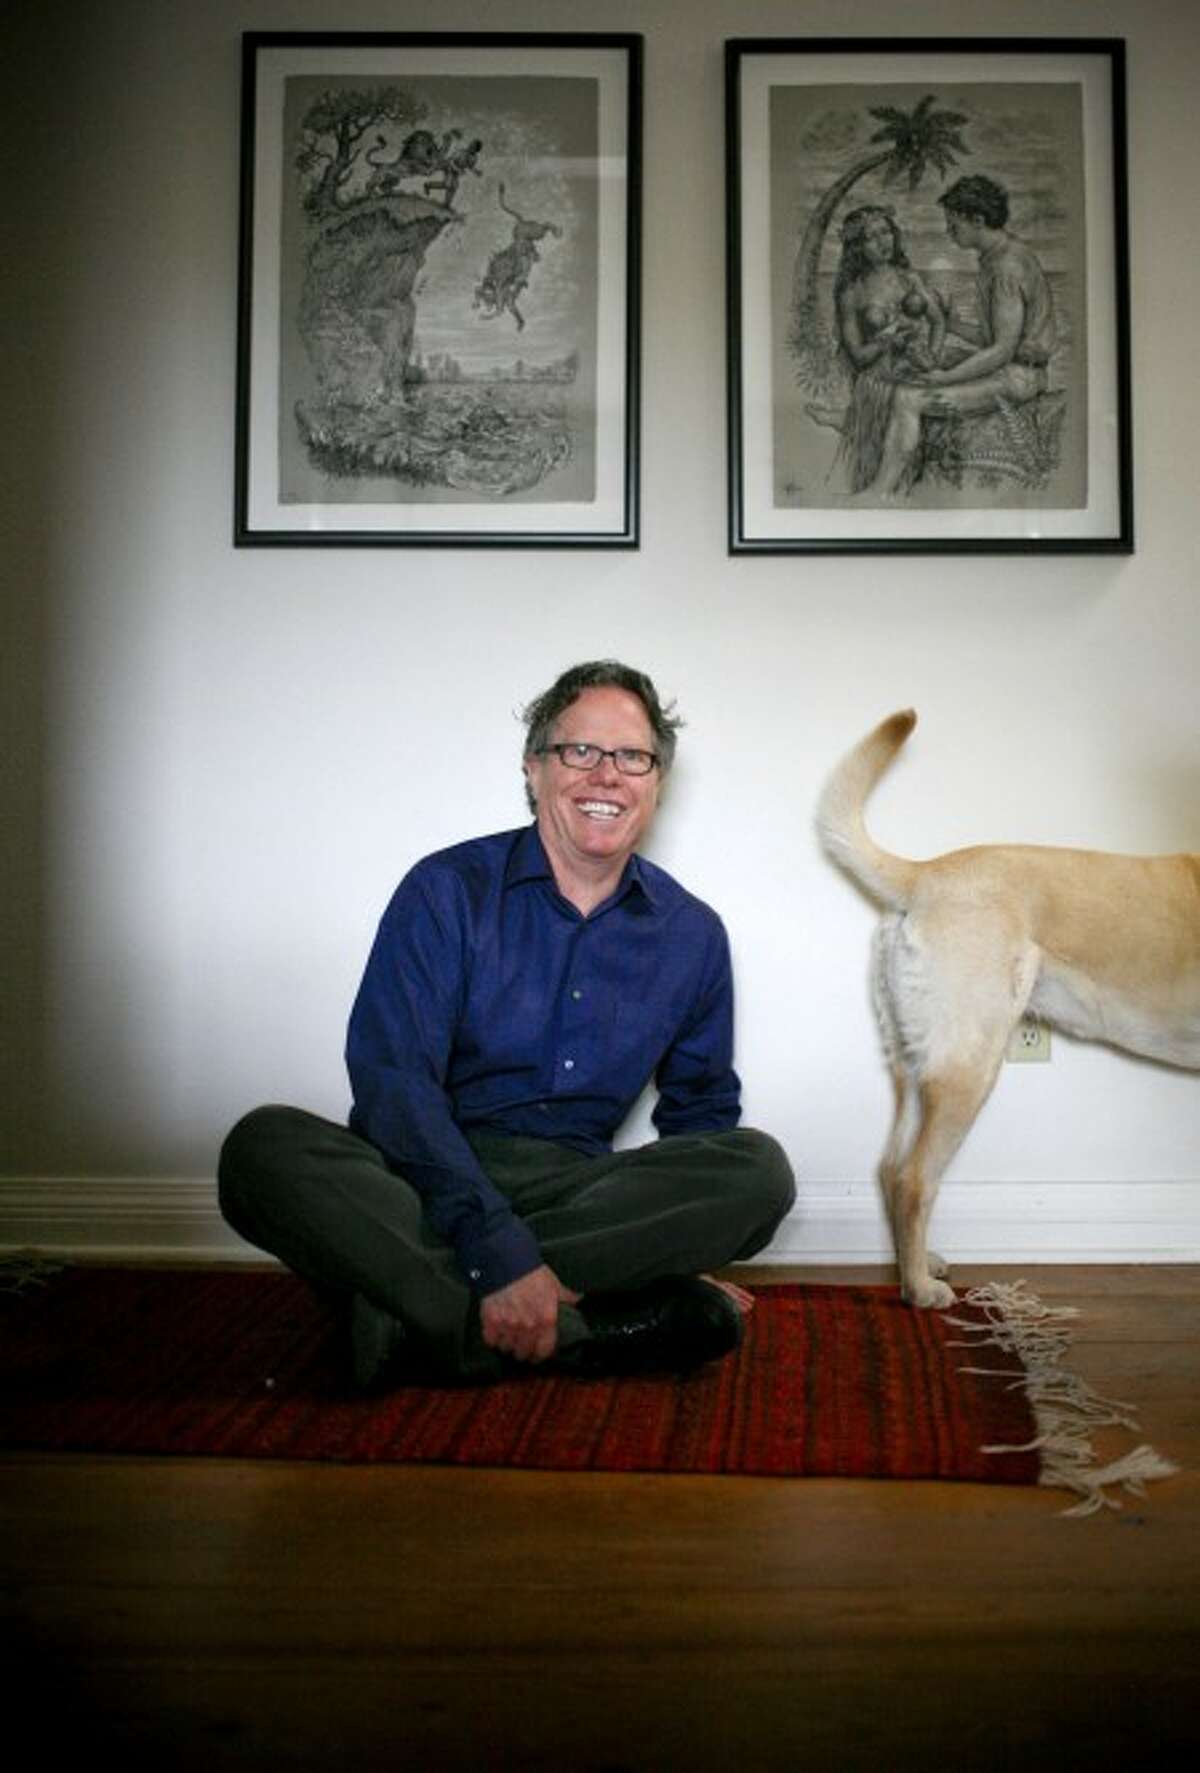 Jack Handey, author of "What I''d Say to Martians" and "Deep Thoughts," poses with his dog Ruby at his Santa Fe, N.M. home. (AP Photo/Craig Fritz)